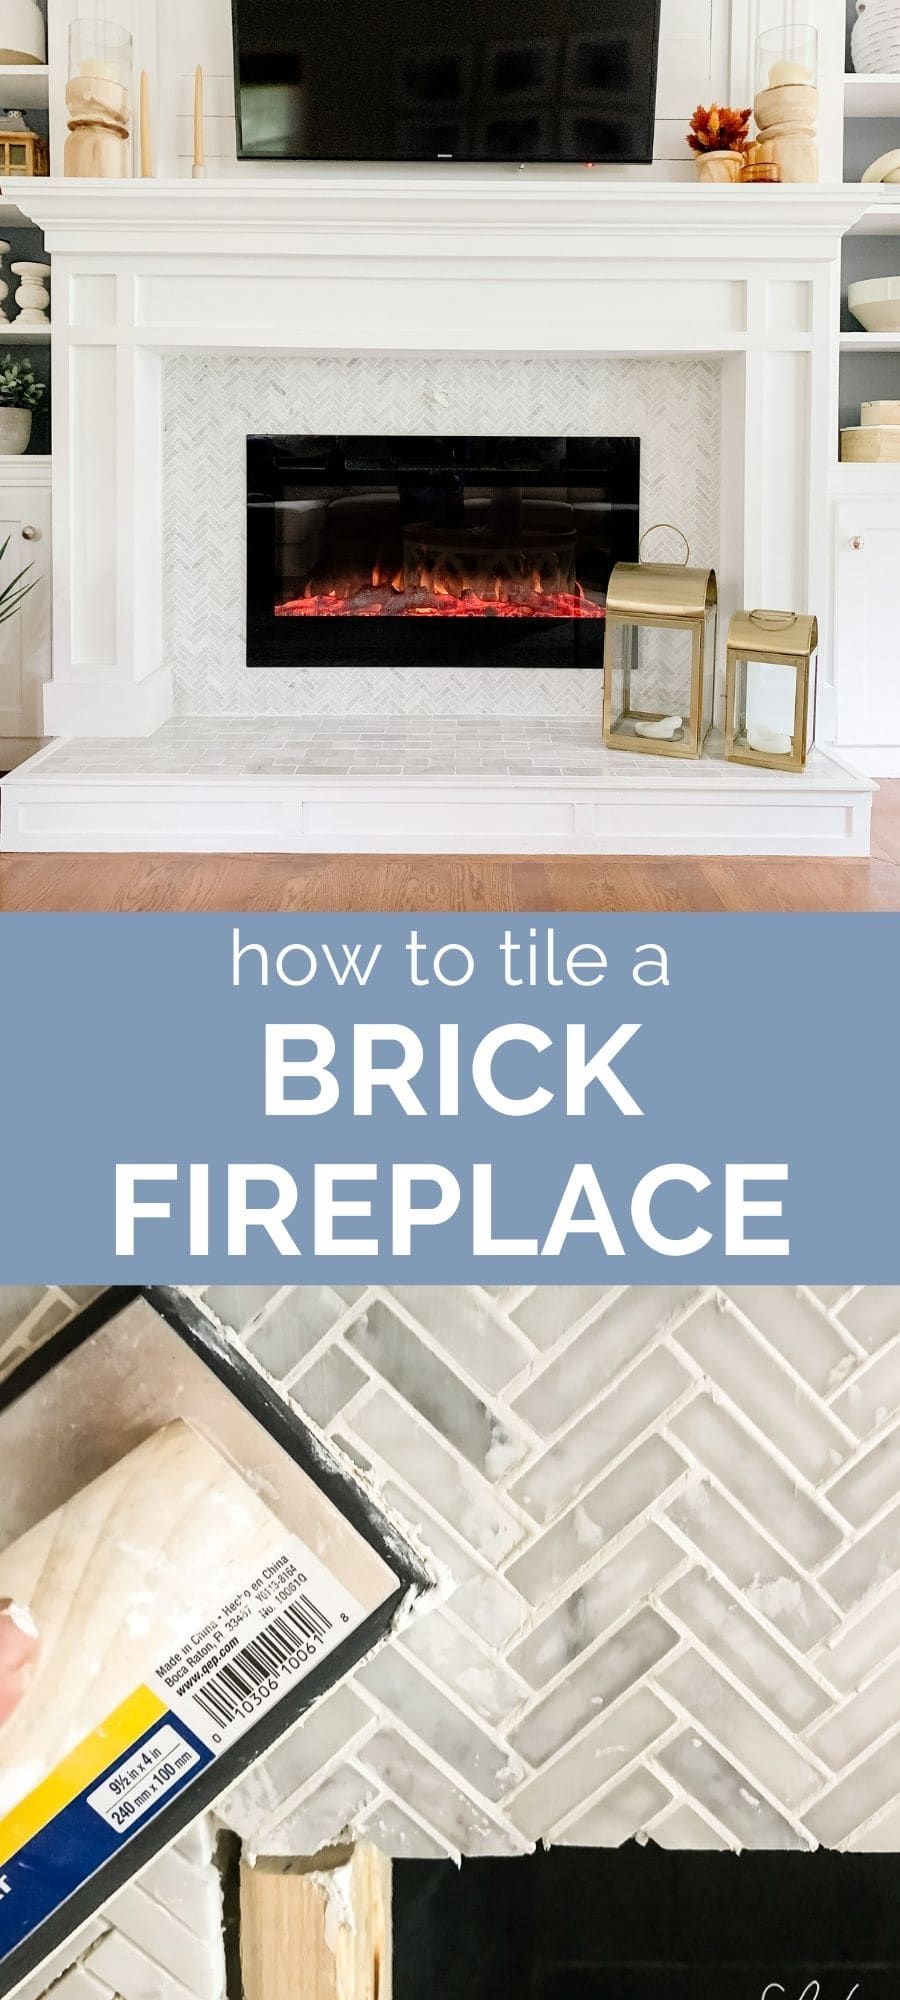 How To Tile A Brick Fireplace Jenna, What Tile Adhesive To Use In Fireplace